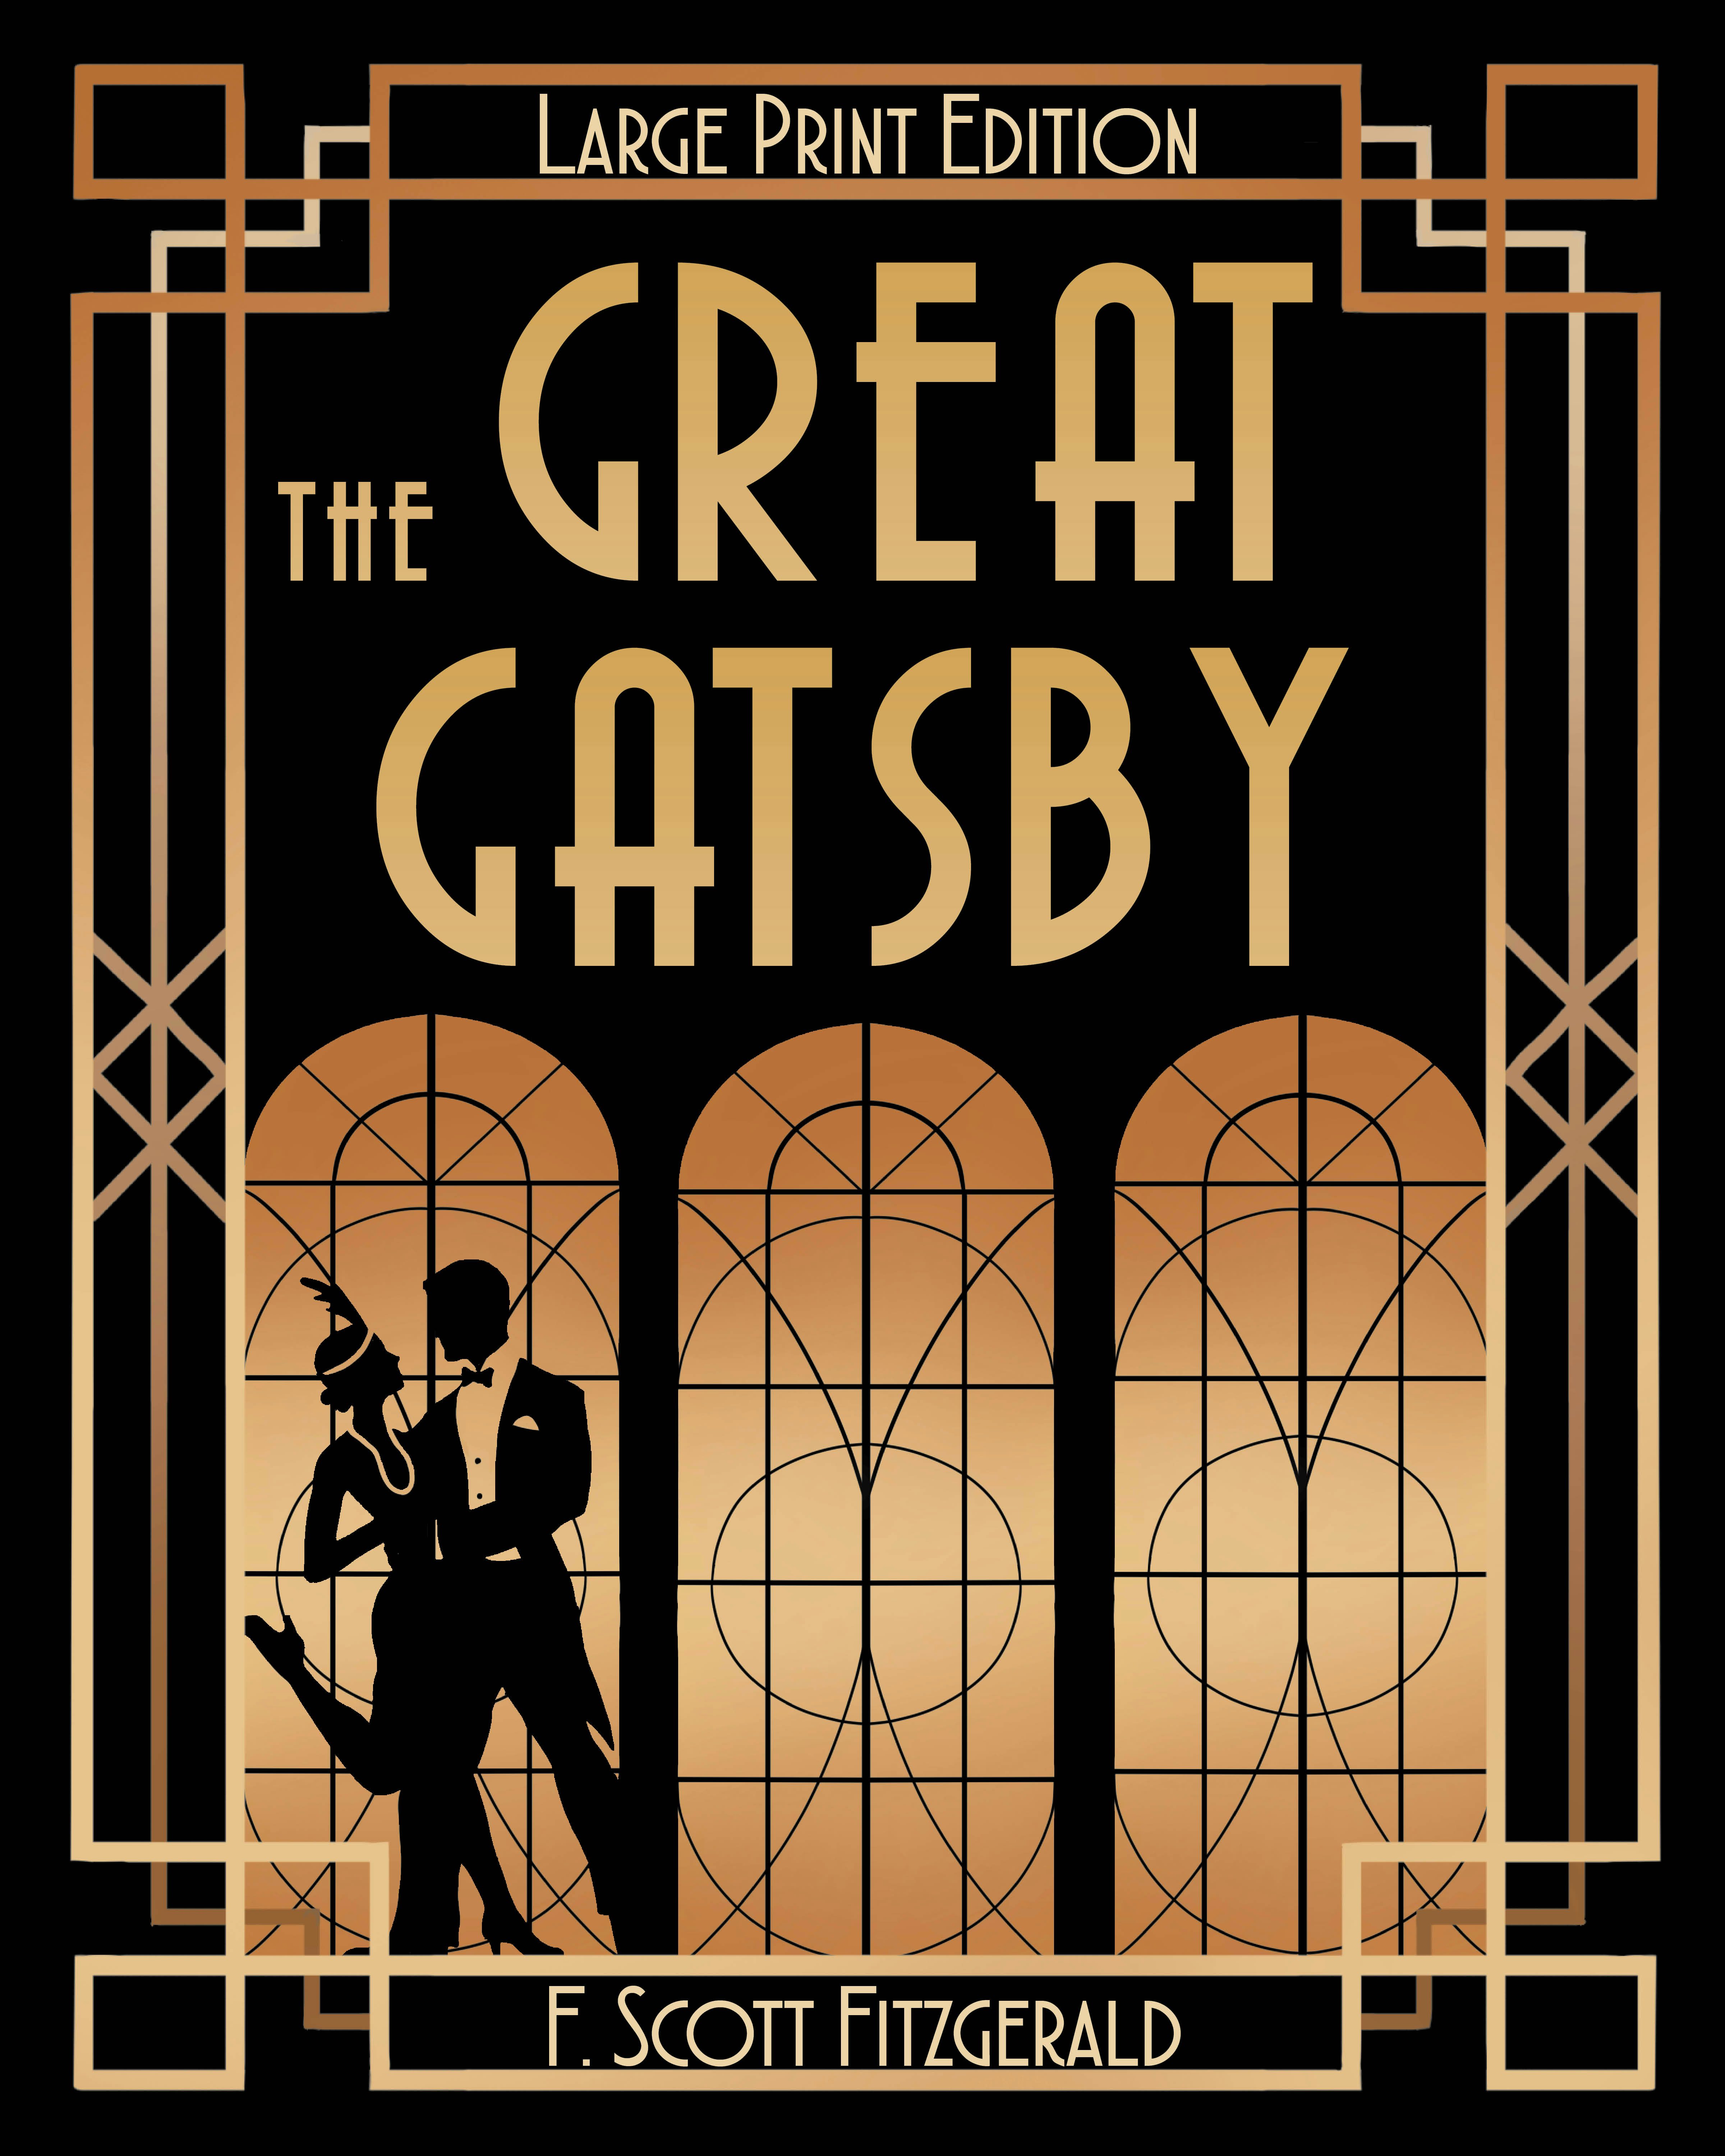 The Great Gatsby for ios download